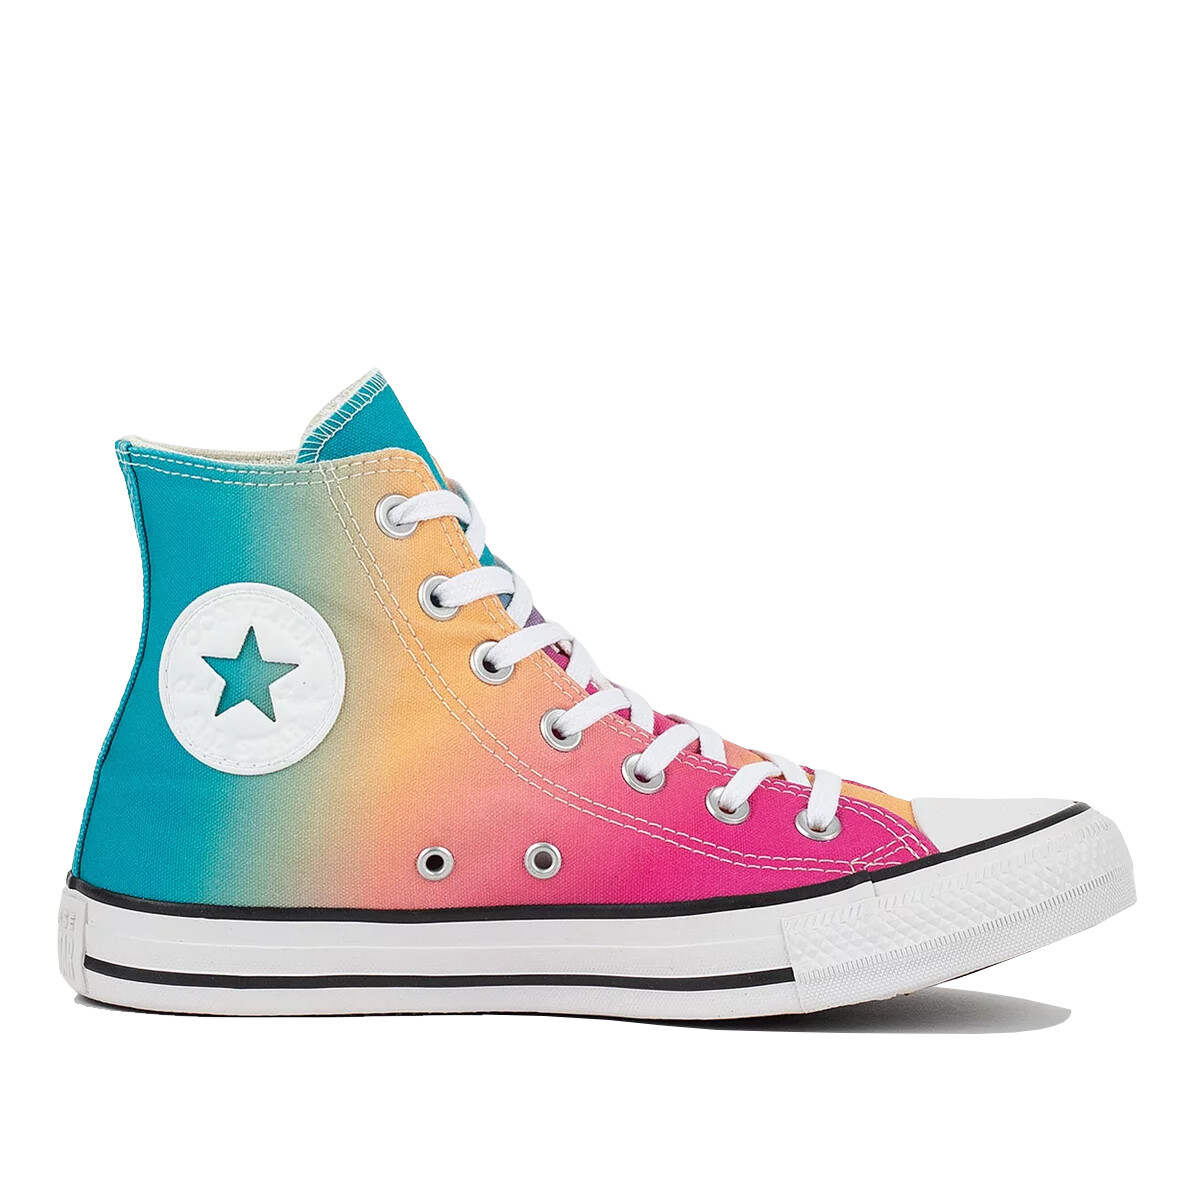 Championes Converse - CHUCK TAYLOR ALL STAR - A02627C - FIRE OPAL/RAPID TEAL/ WHITE 